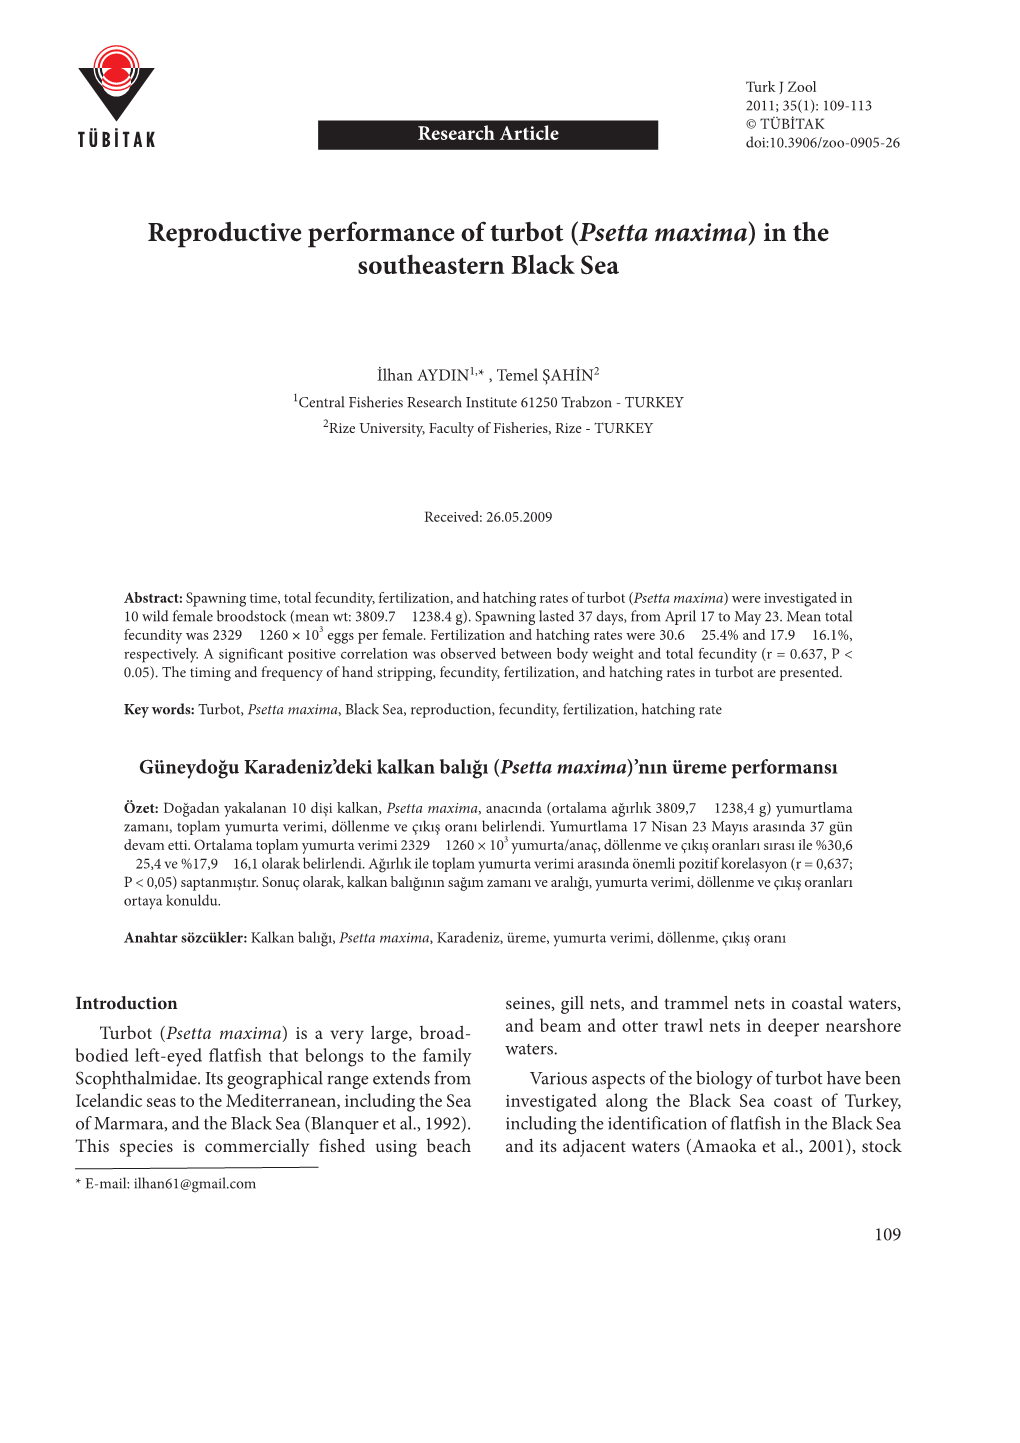 Reproductive Performance of Turbot (Psetta Maxima) in the Southeastern Black Sea